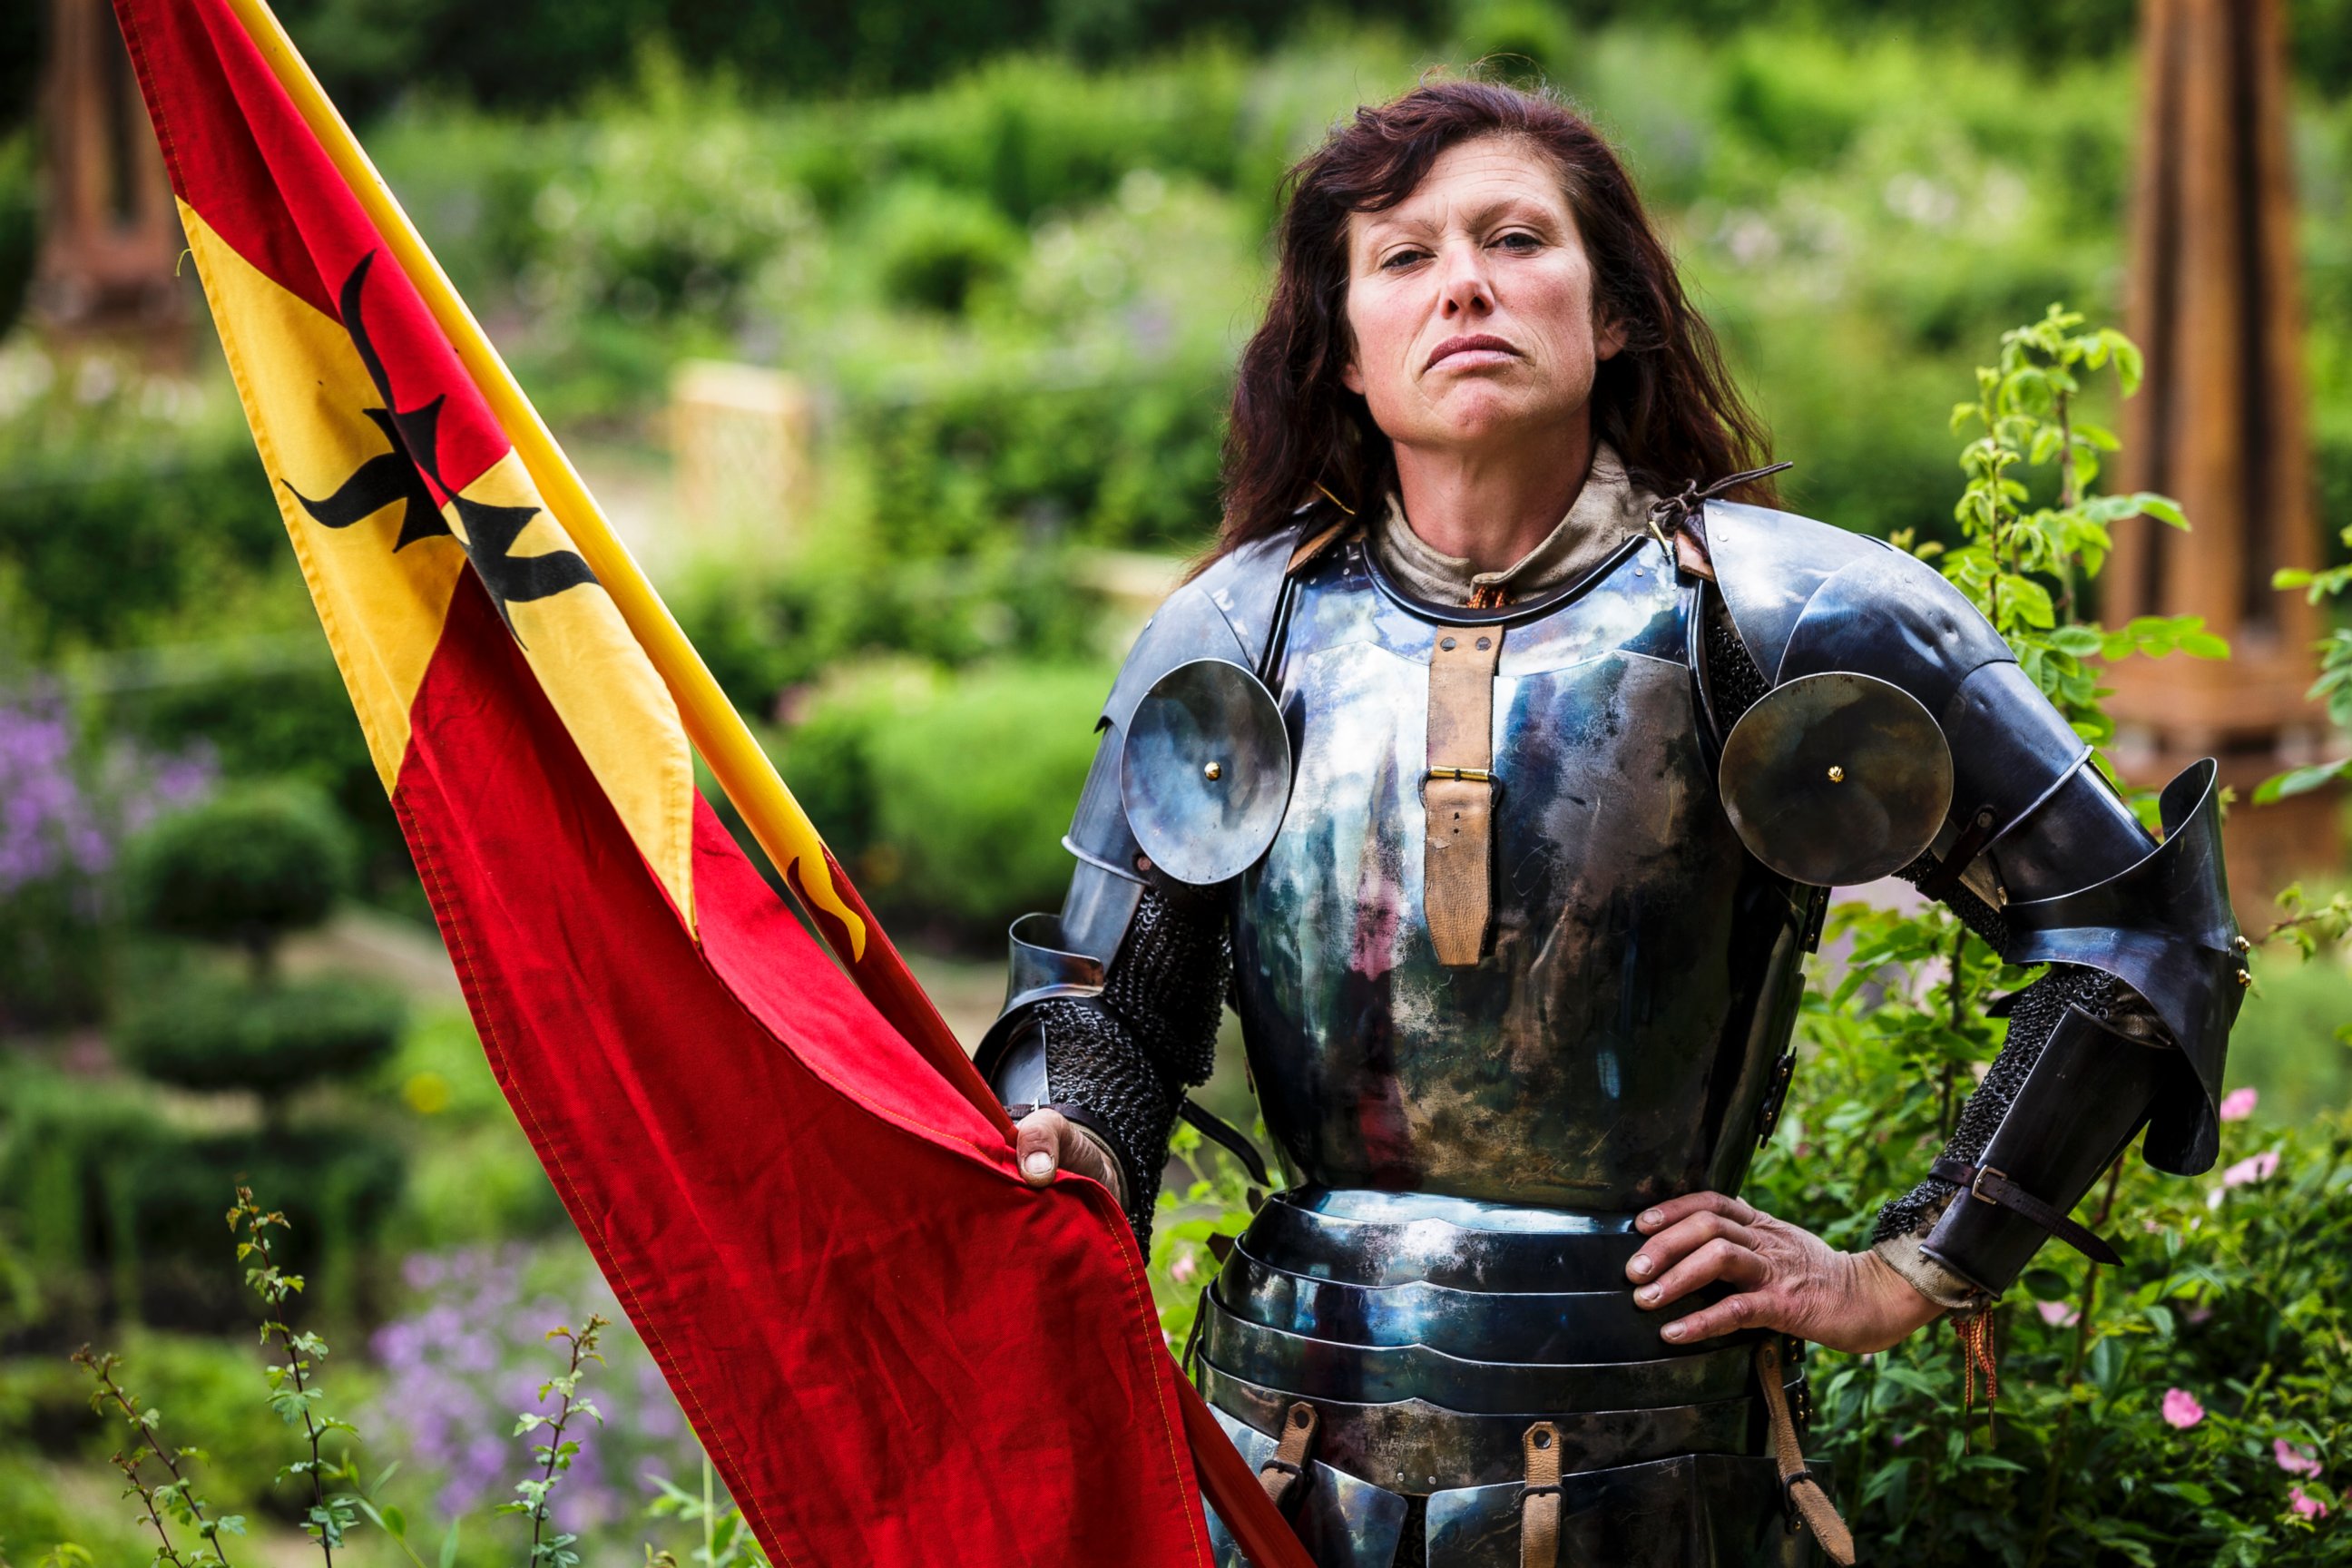 PHOTO: Women will be joining joust tournaments hosted at English Heritage castles in the UK for the first time this summer. A female Jouster at Kenilworth Castle, Warwickshire, UK. 